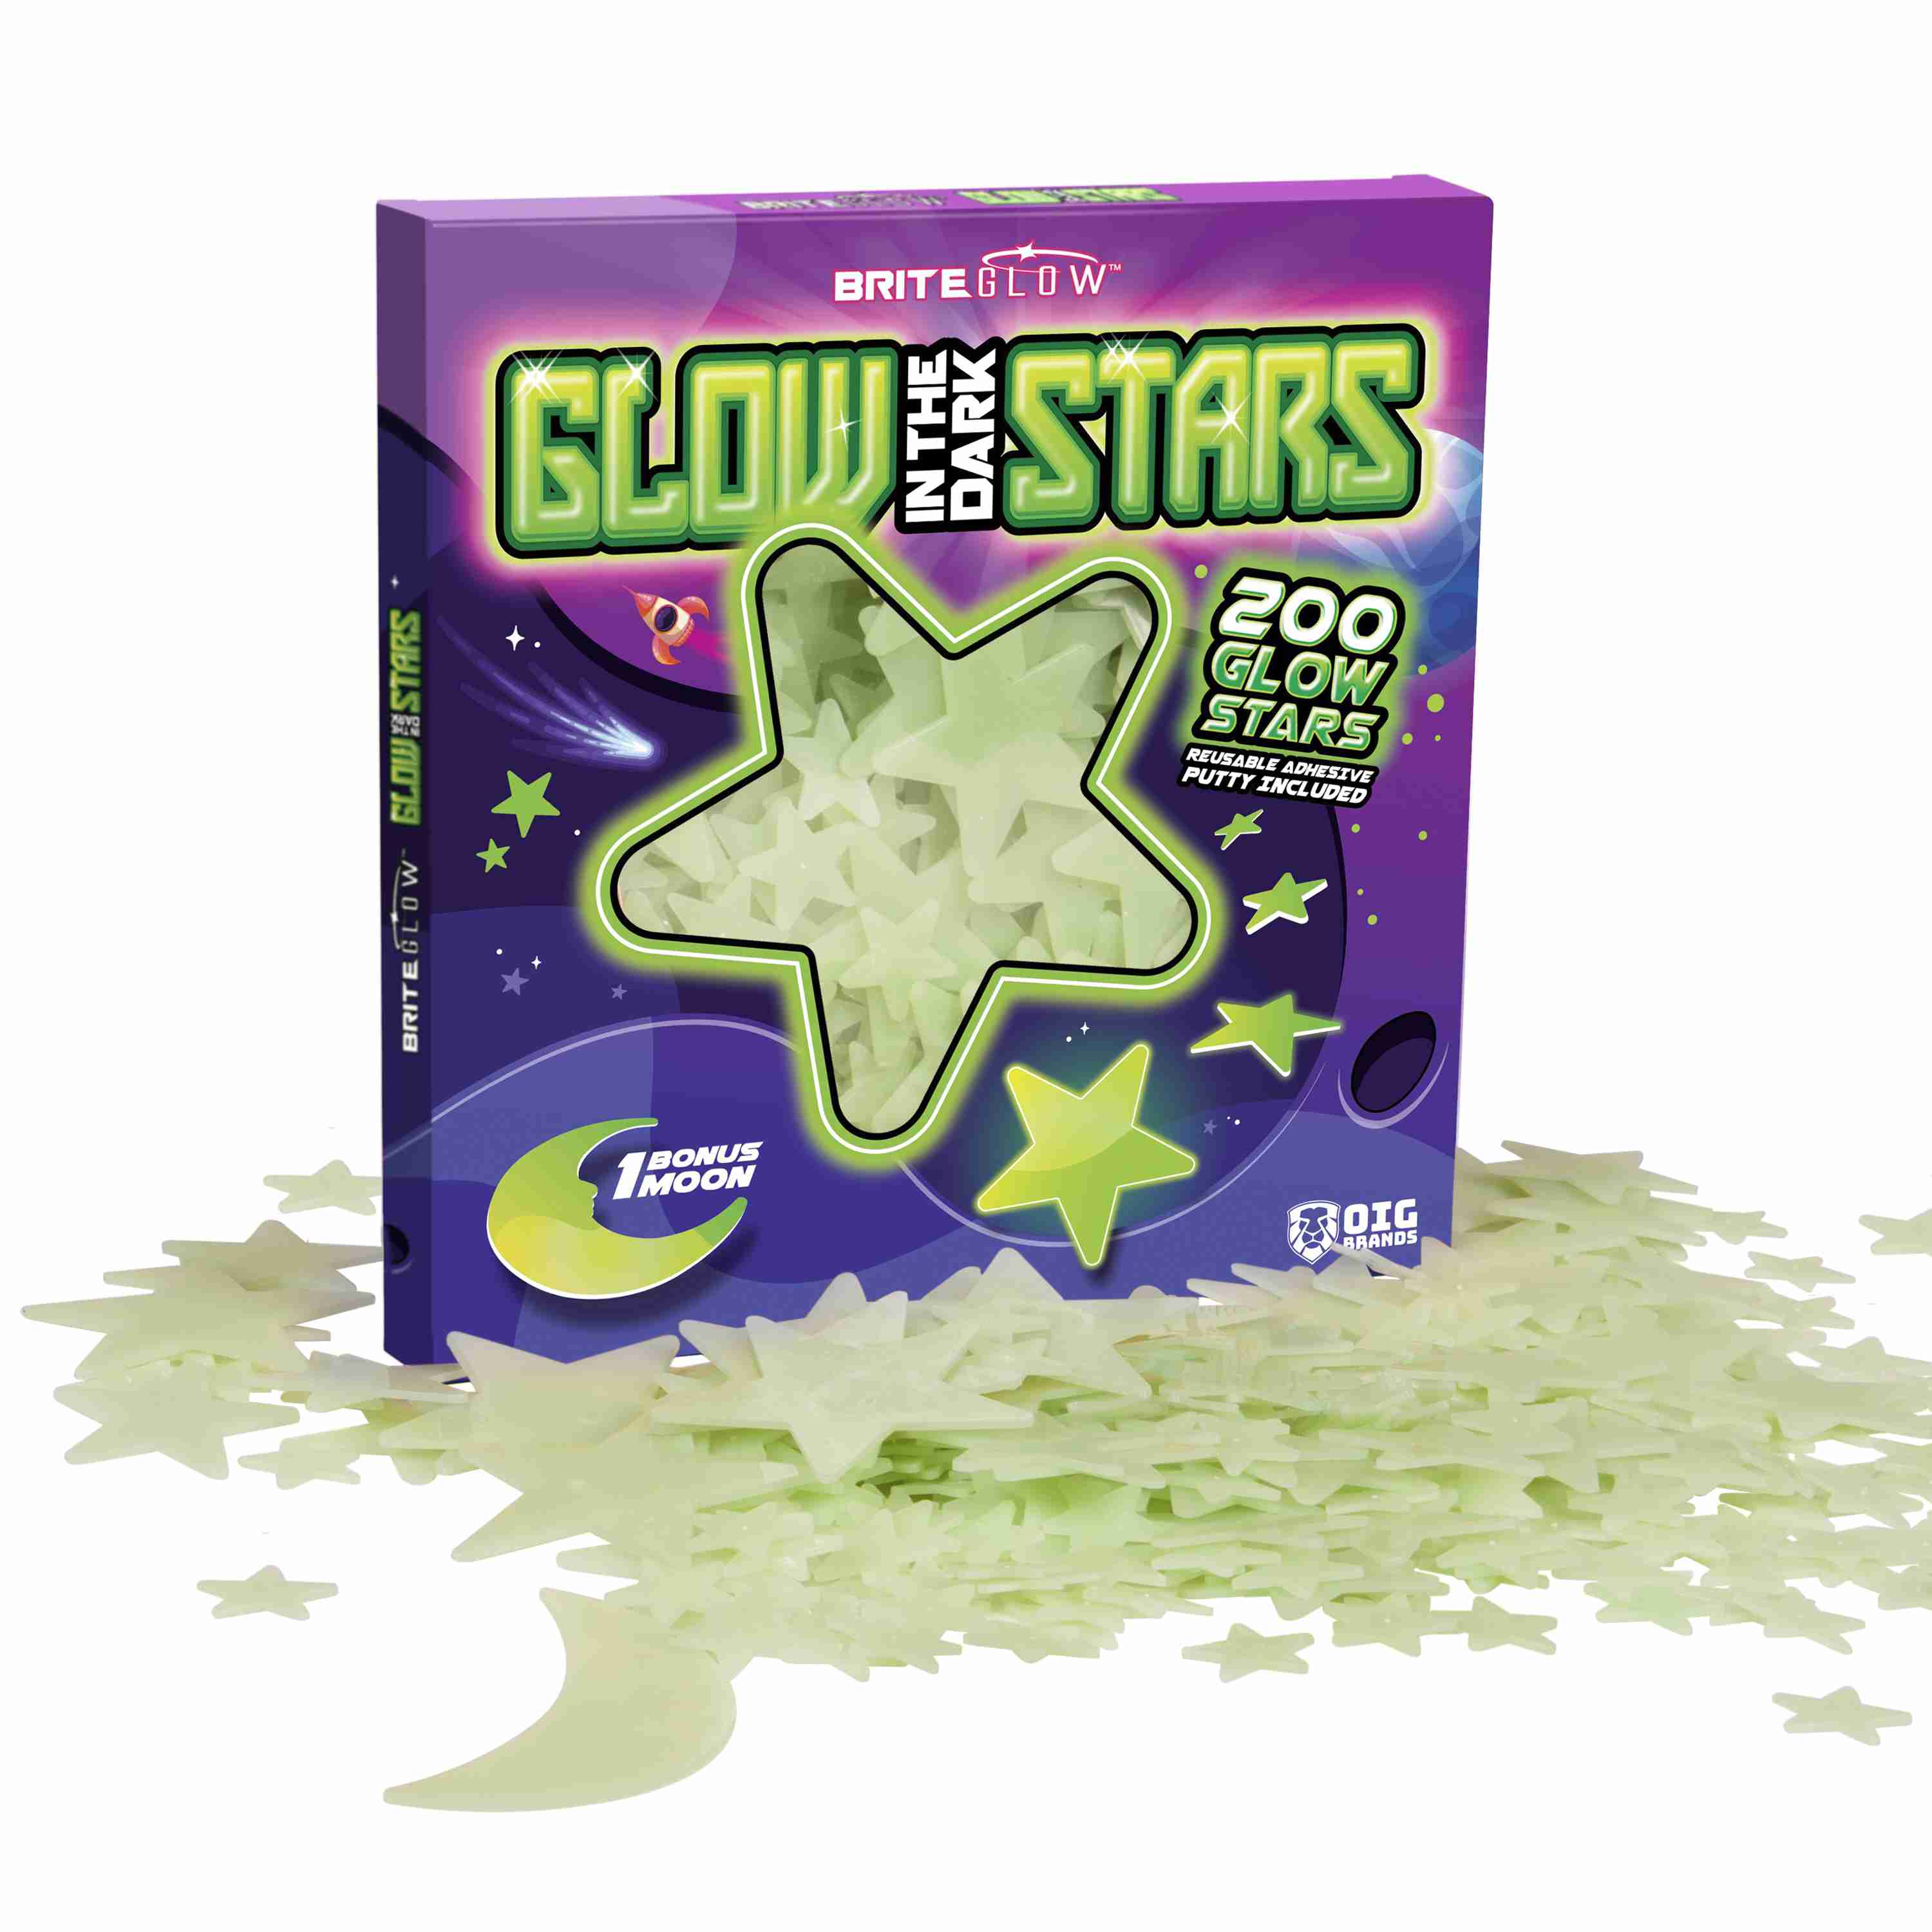 room-decor-glow-in-the-dark-stars-kids-room-stickers with cash back rebate